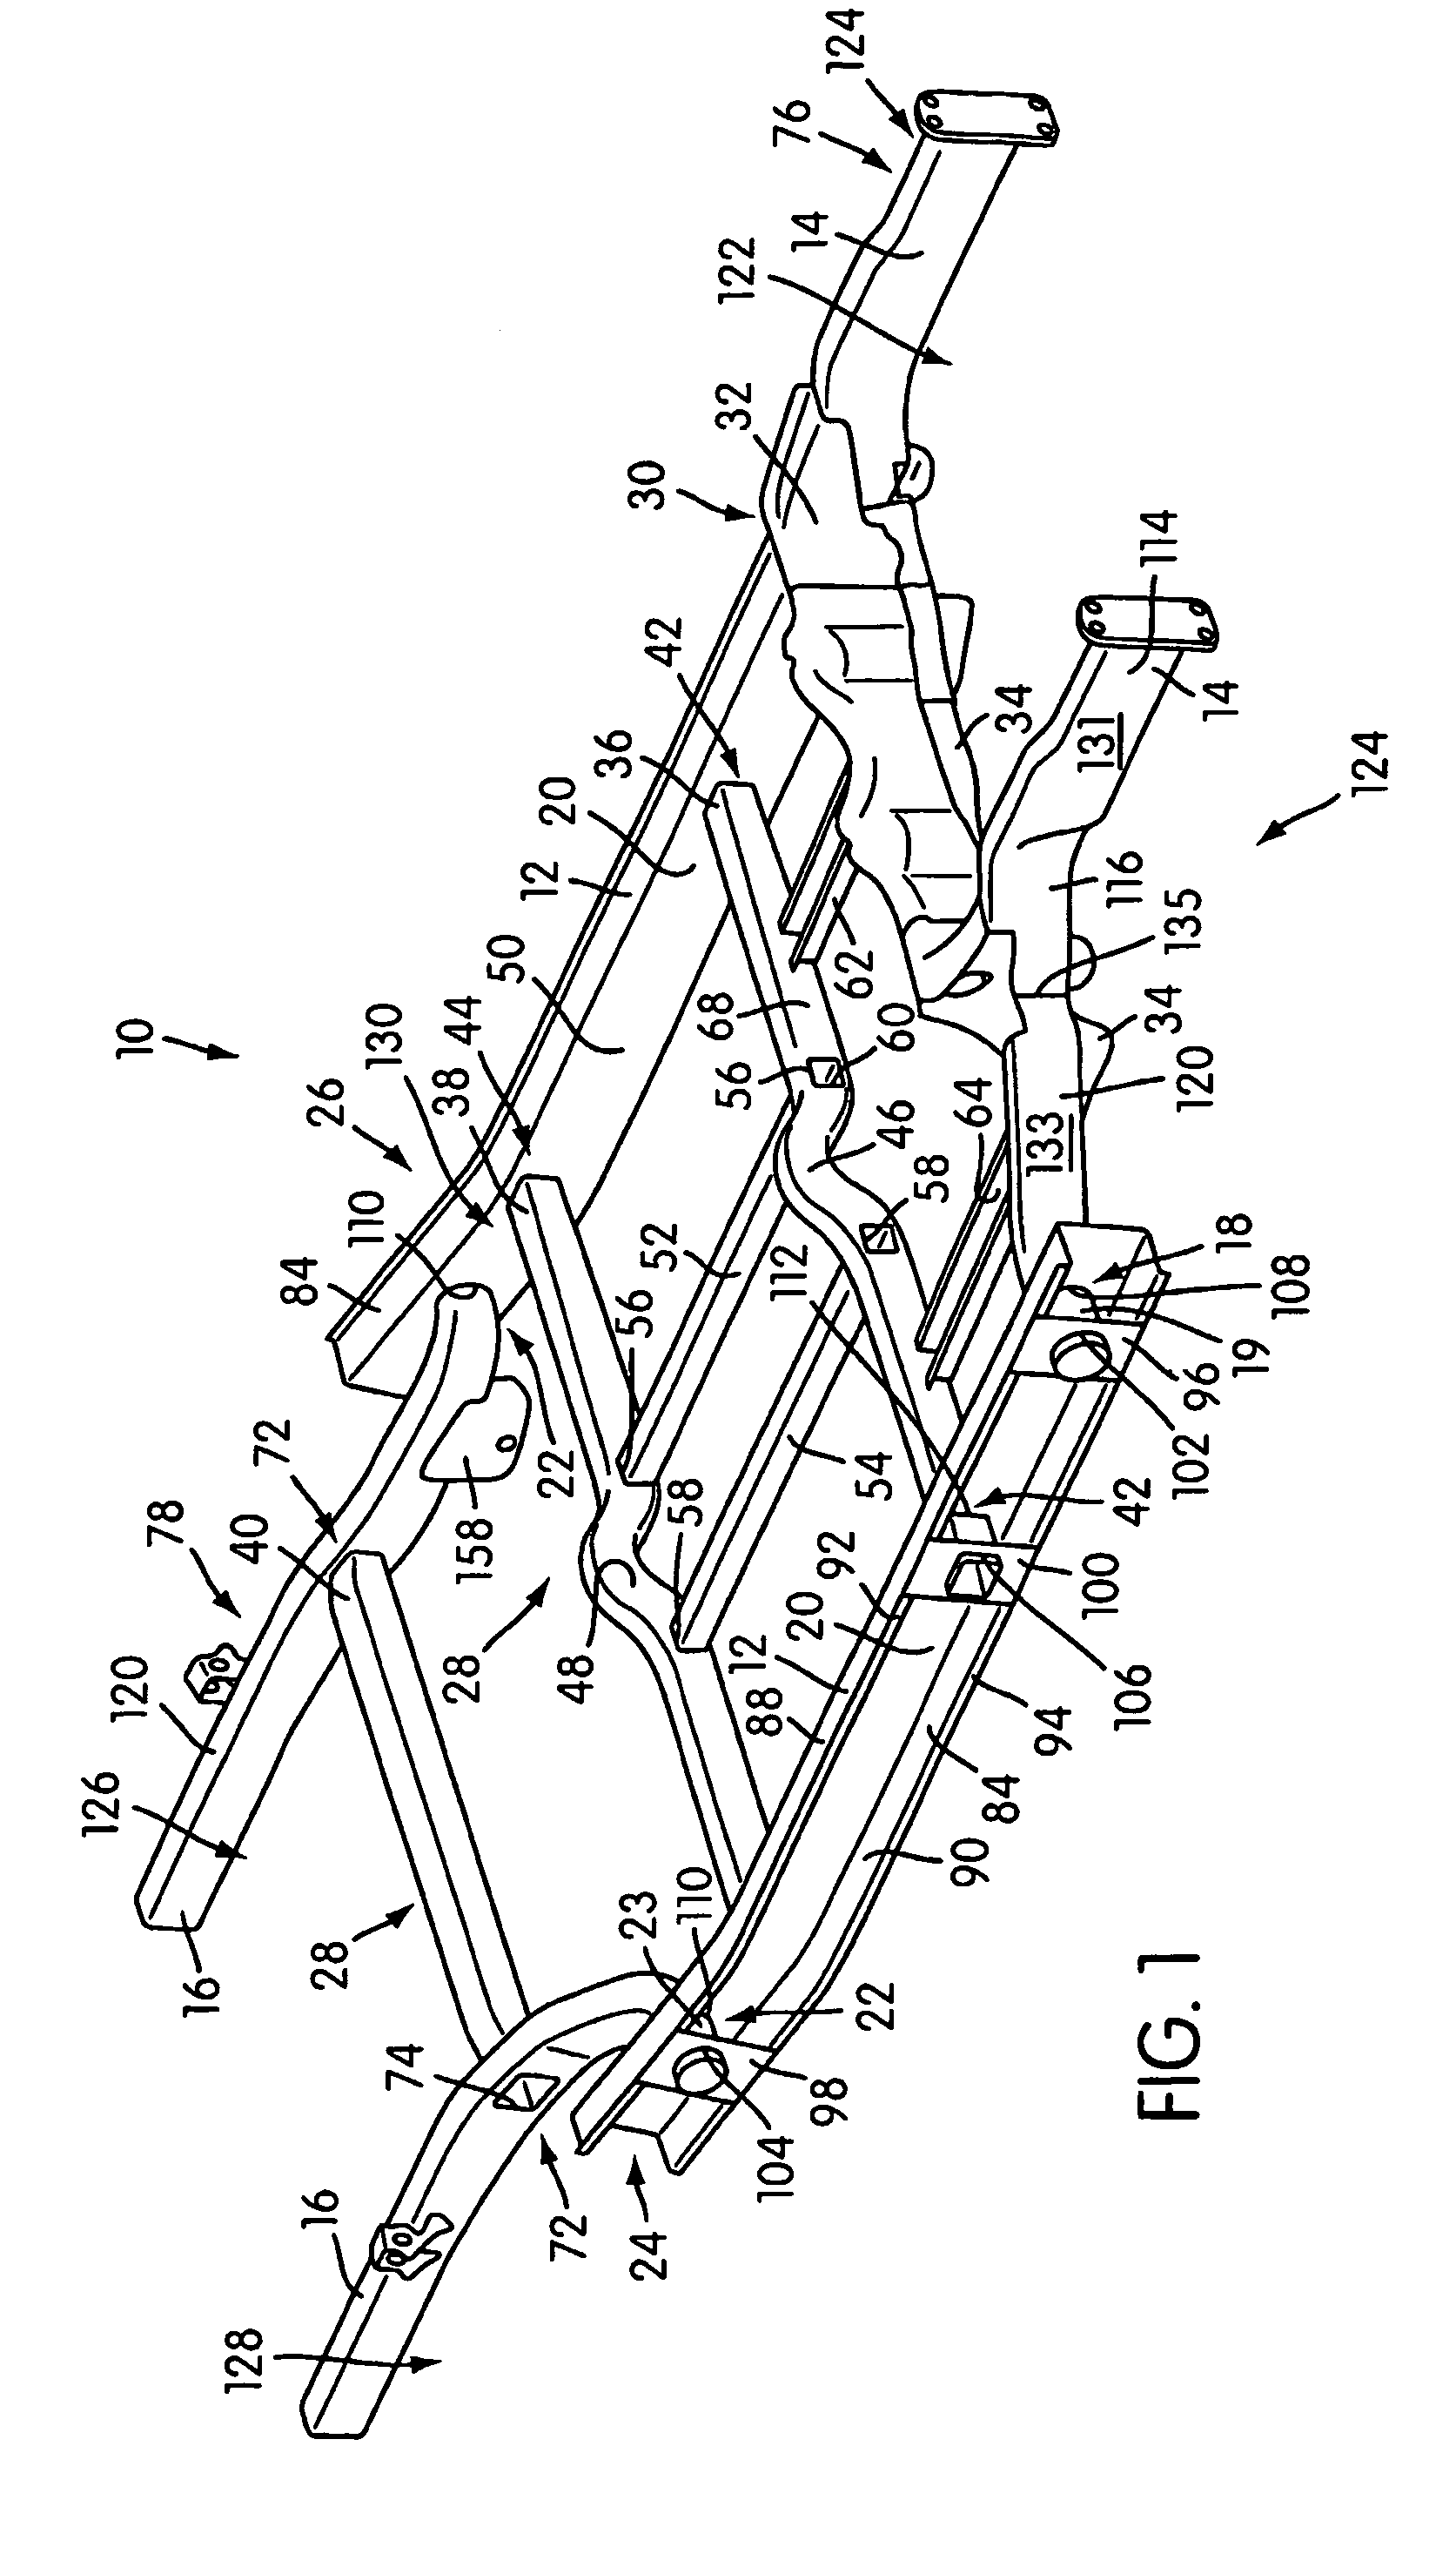 Modular underbody for a motor vehicle